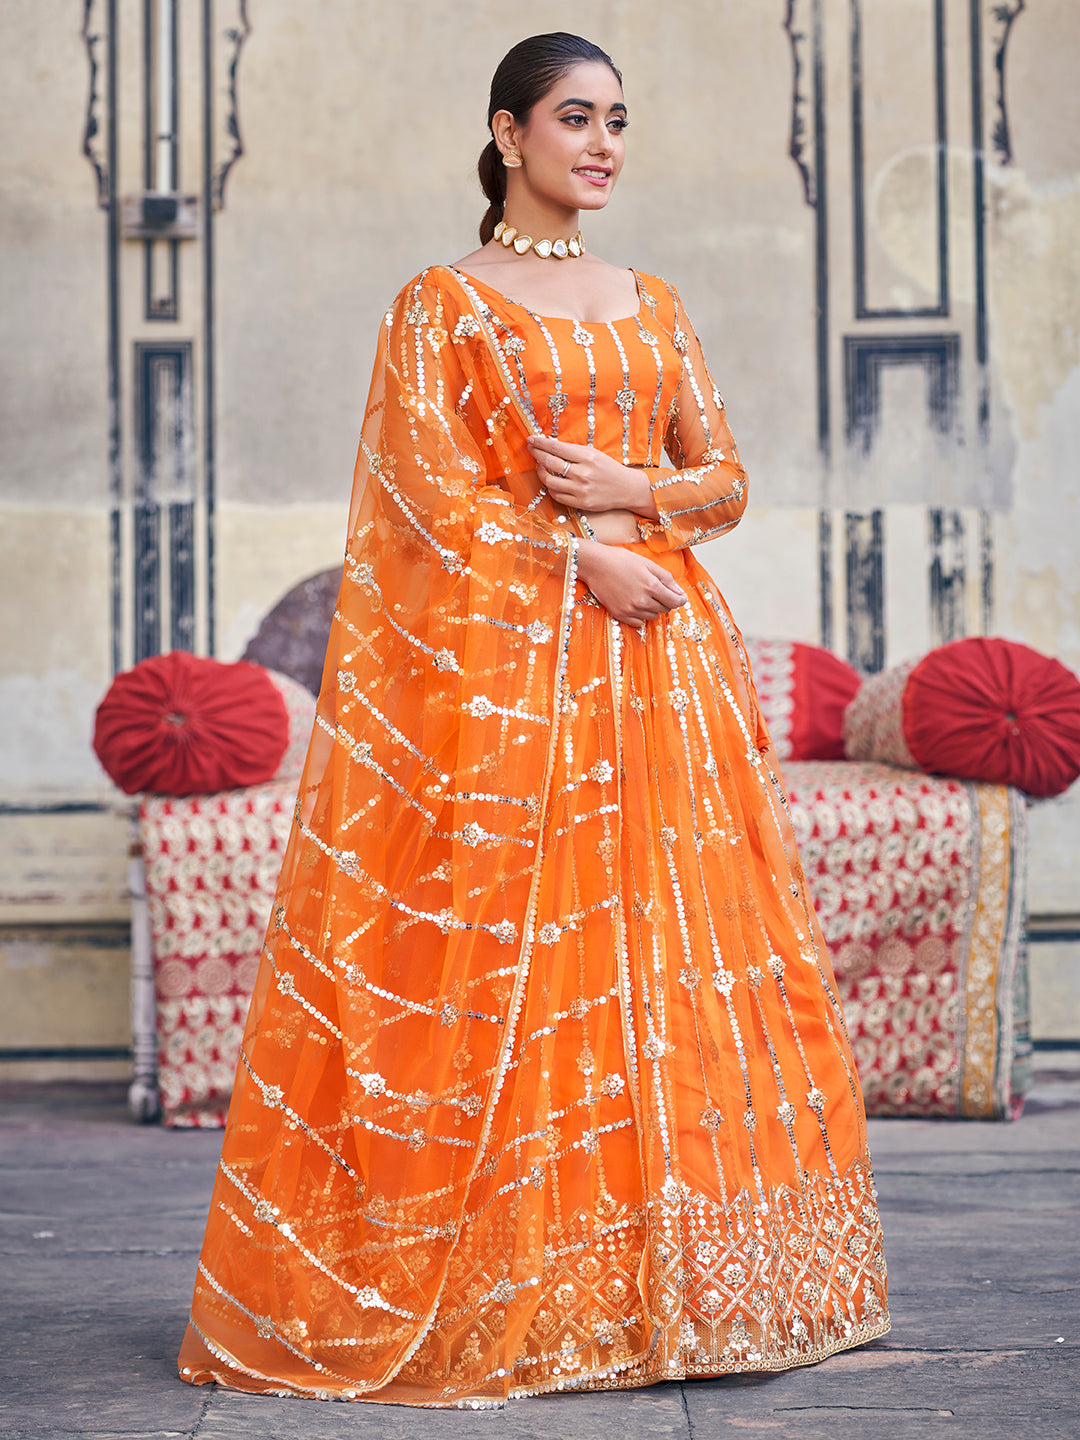 Stunning Orange Sequence Embroidered Soft Net Party Wear Lehenga Choli For Women